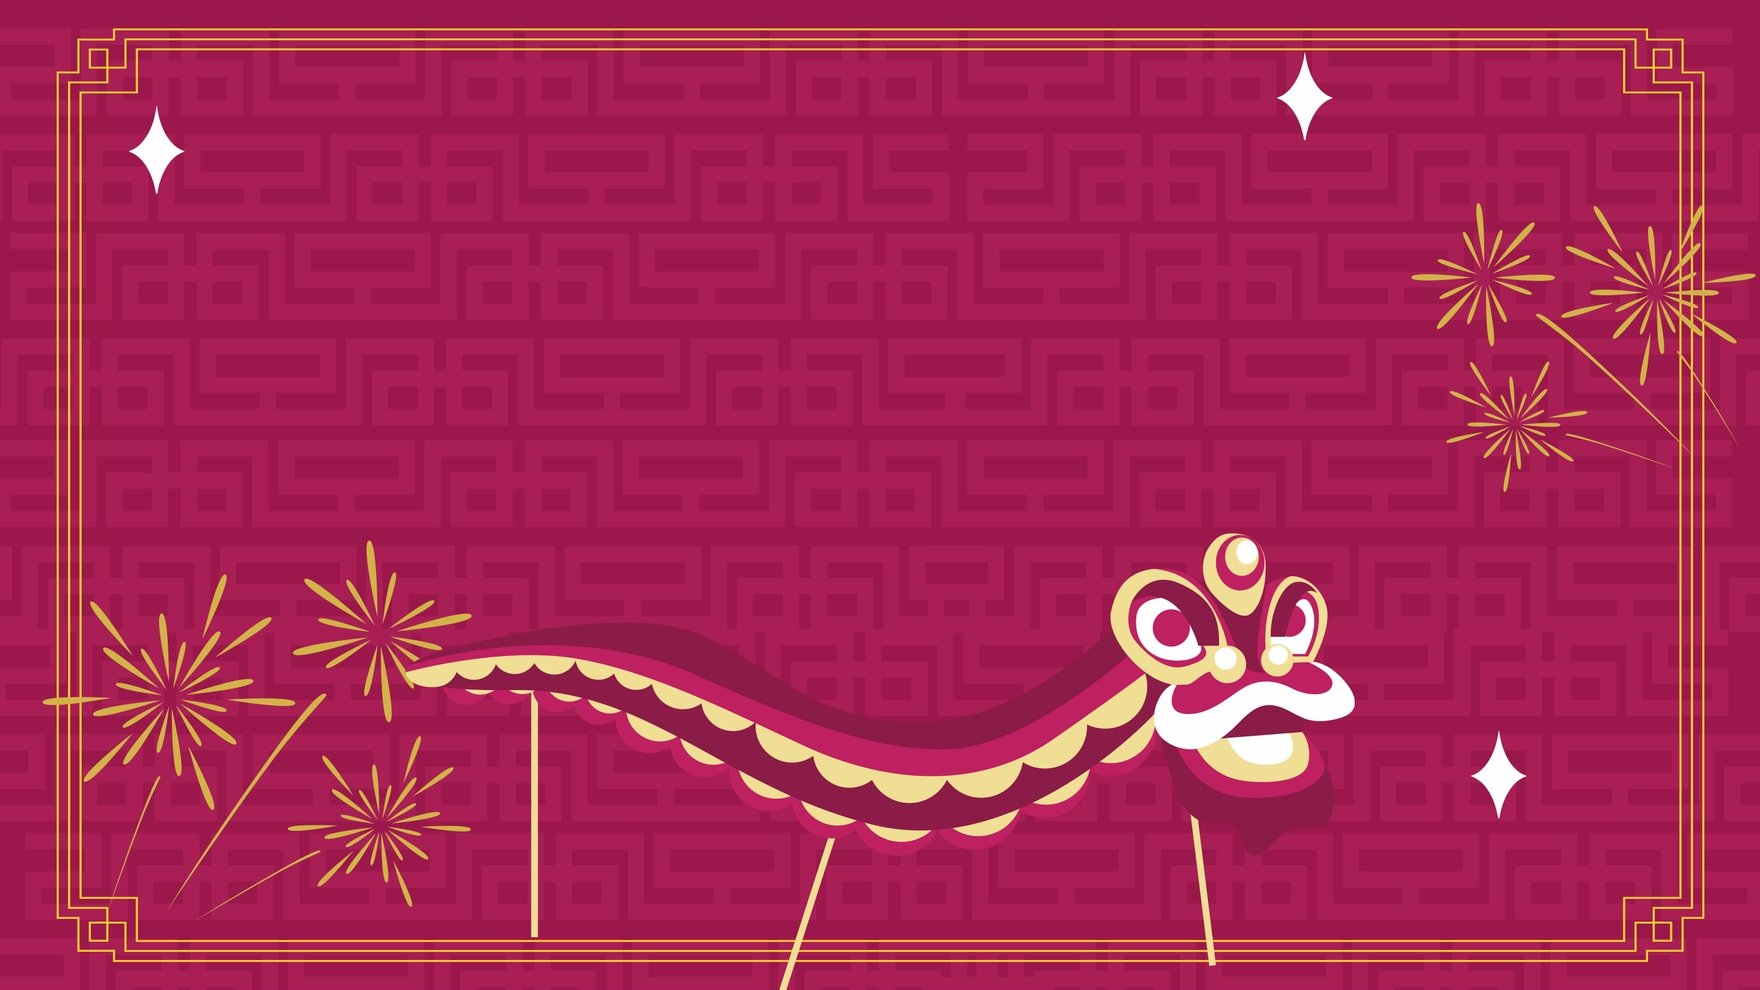 Chinese New Year Pattern Background in PDF, Illustrator, PSD, EPS, SVG, JPG, PNG